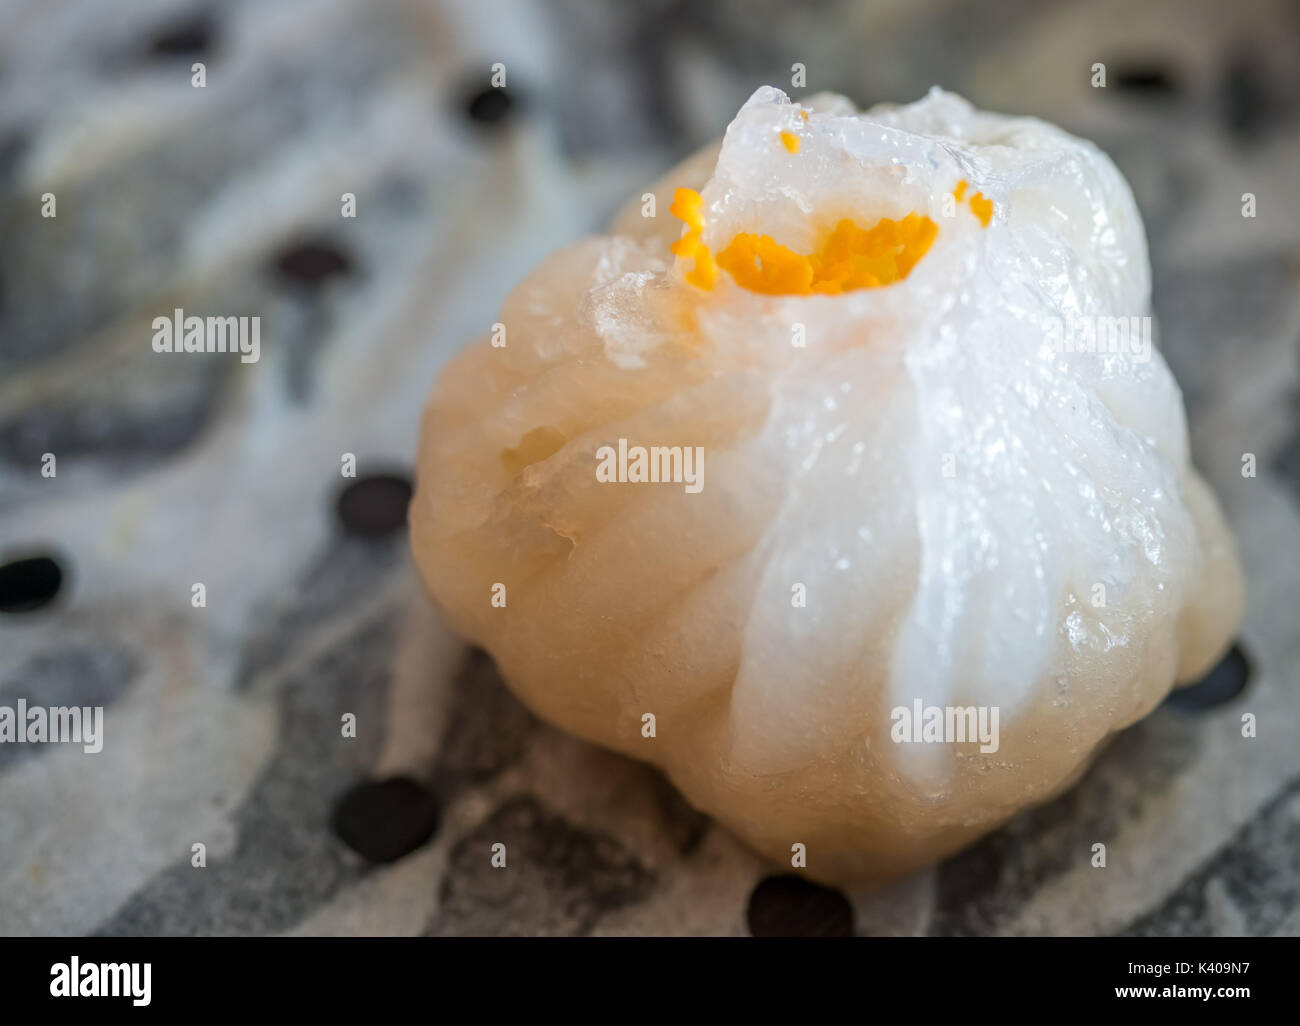 Steamed chinese dumpling, shrimp mold with thin layer of starch